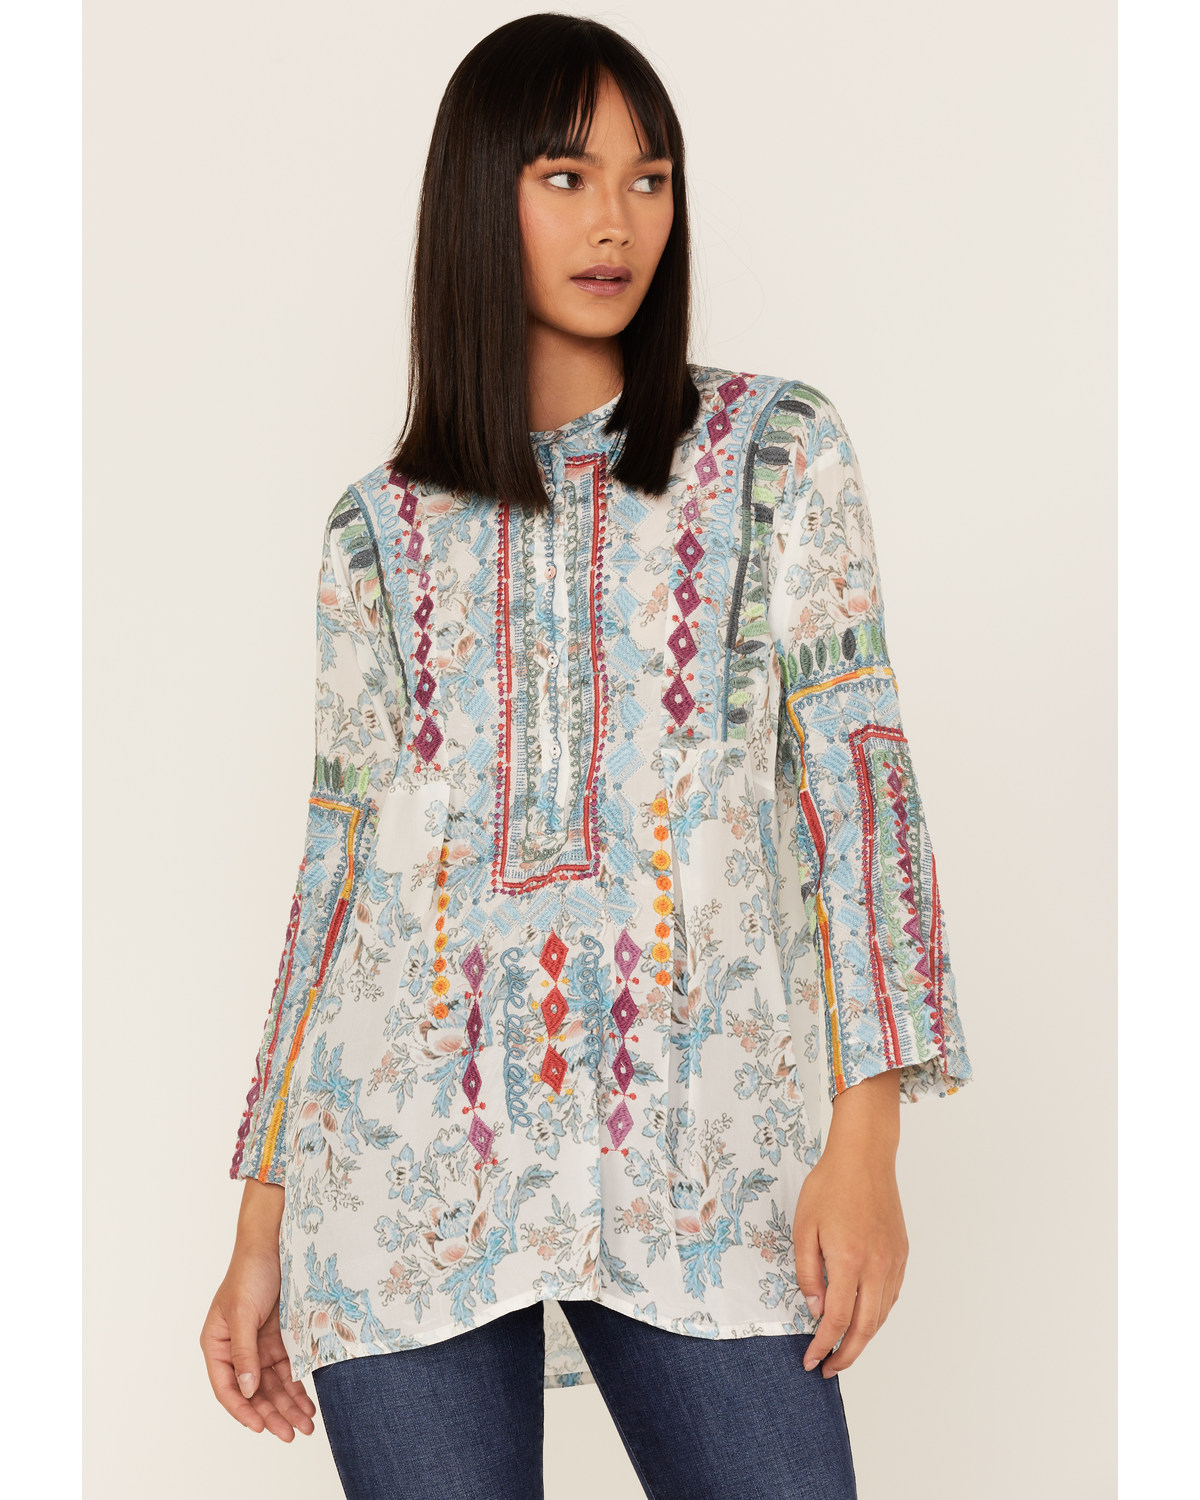 Johnny Was Women's Isla Embroidered Floral Print Tunic Blouse